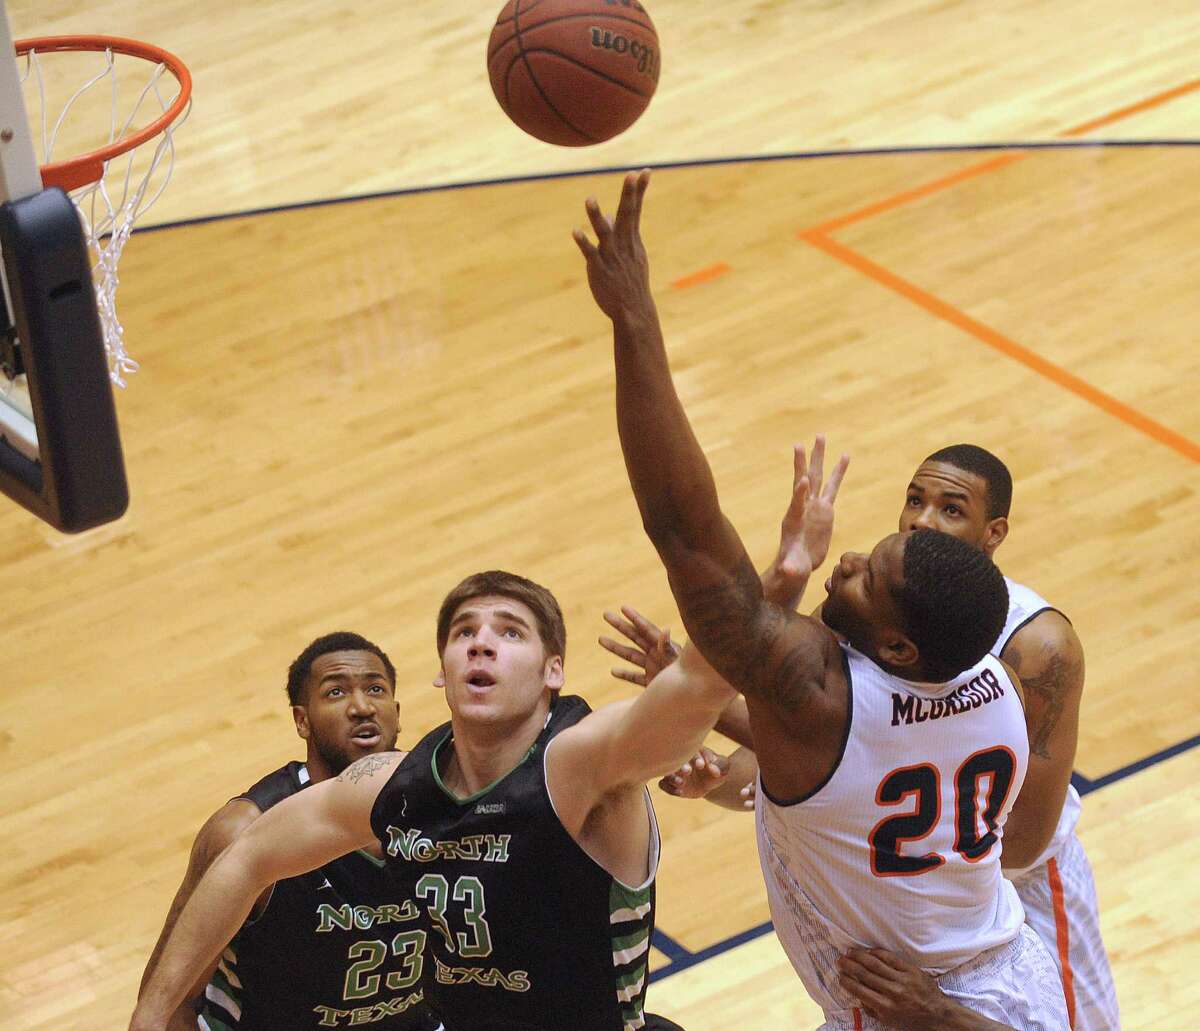 UTSA's Edrico McGregor shoots as Colin Voss of North Texas defends during college basketball action at the UTSA Convocation Center on Thursday, Feb. 27, 2014.